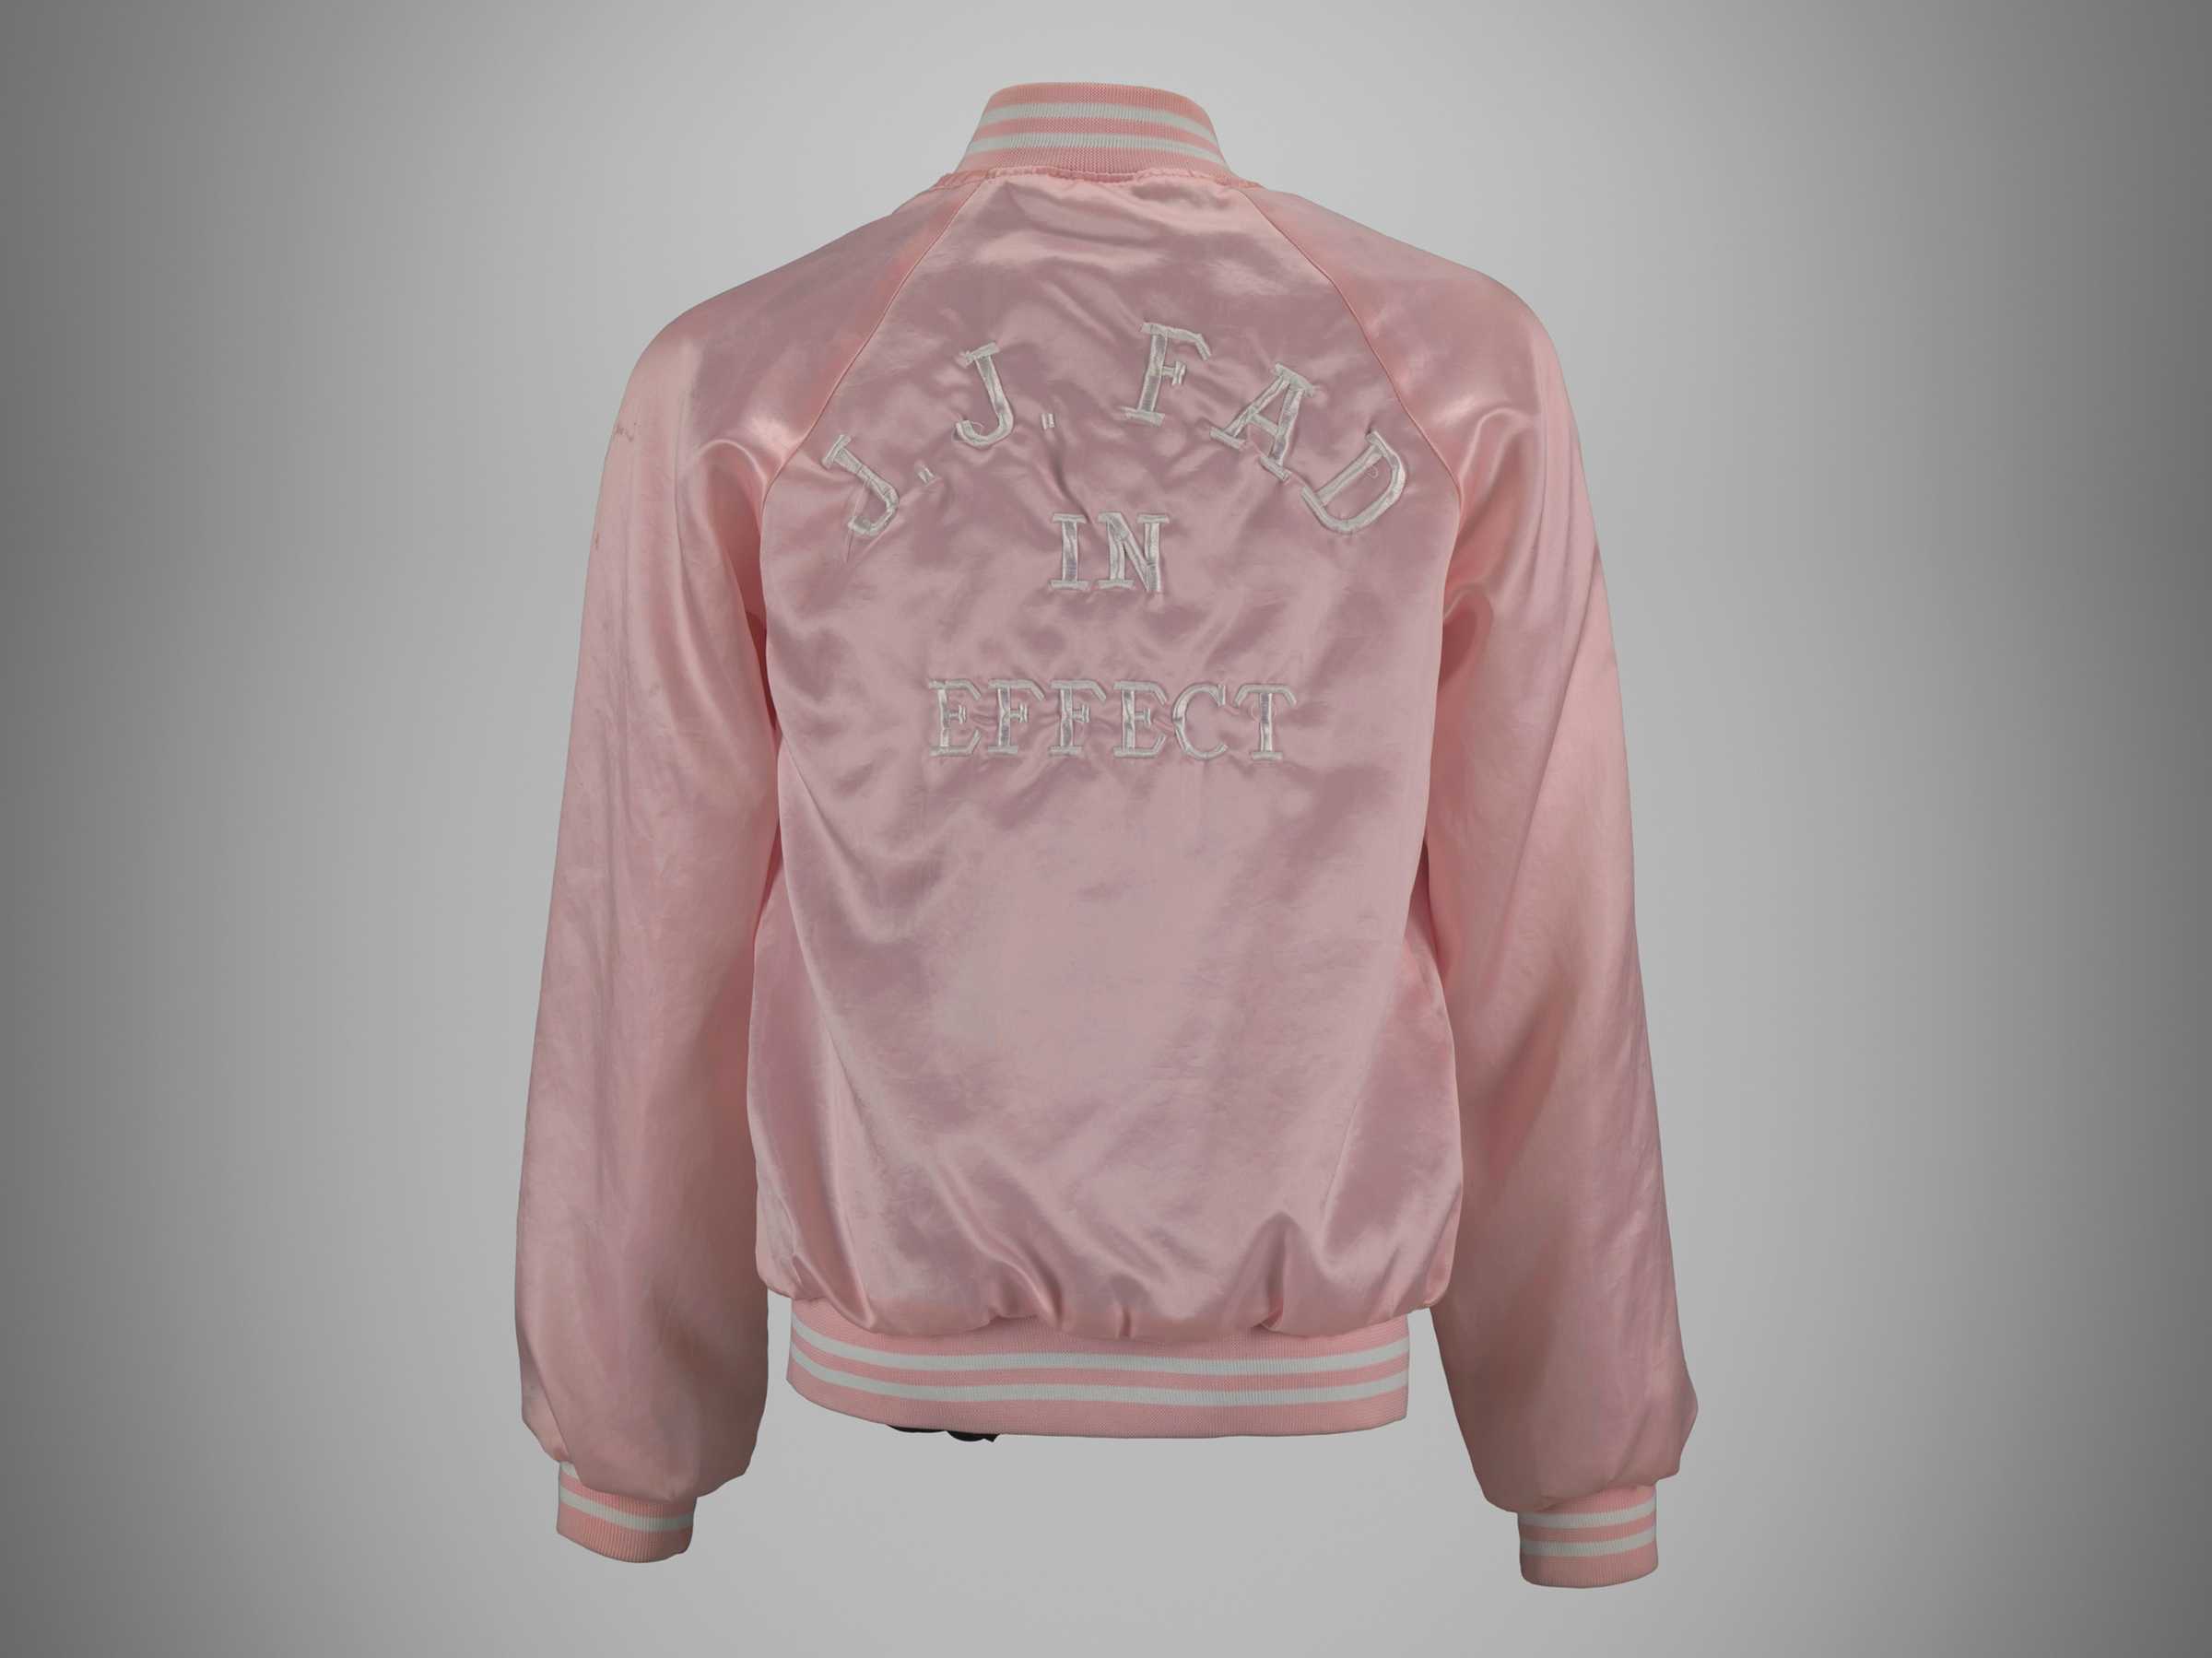 Back view of a pink satin jacket, embroidered with "J.J. Fad in Effect"